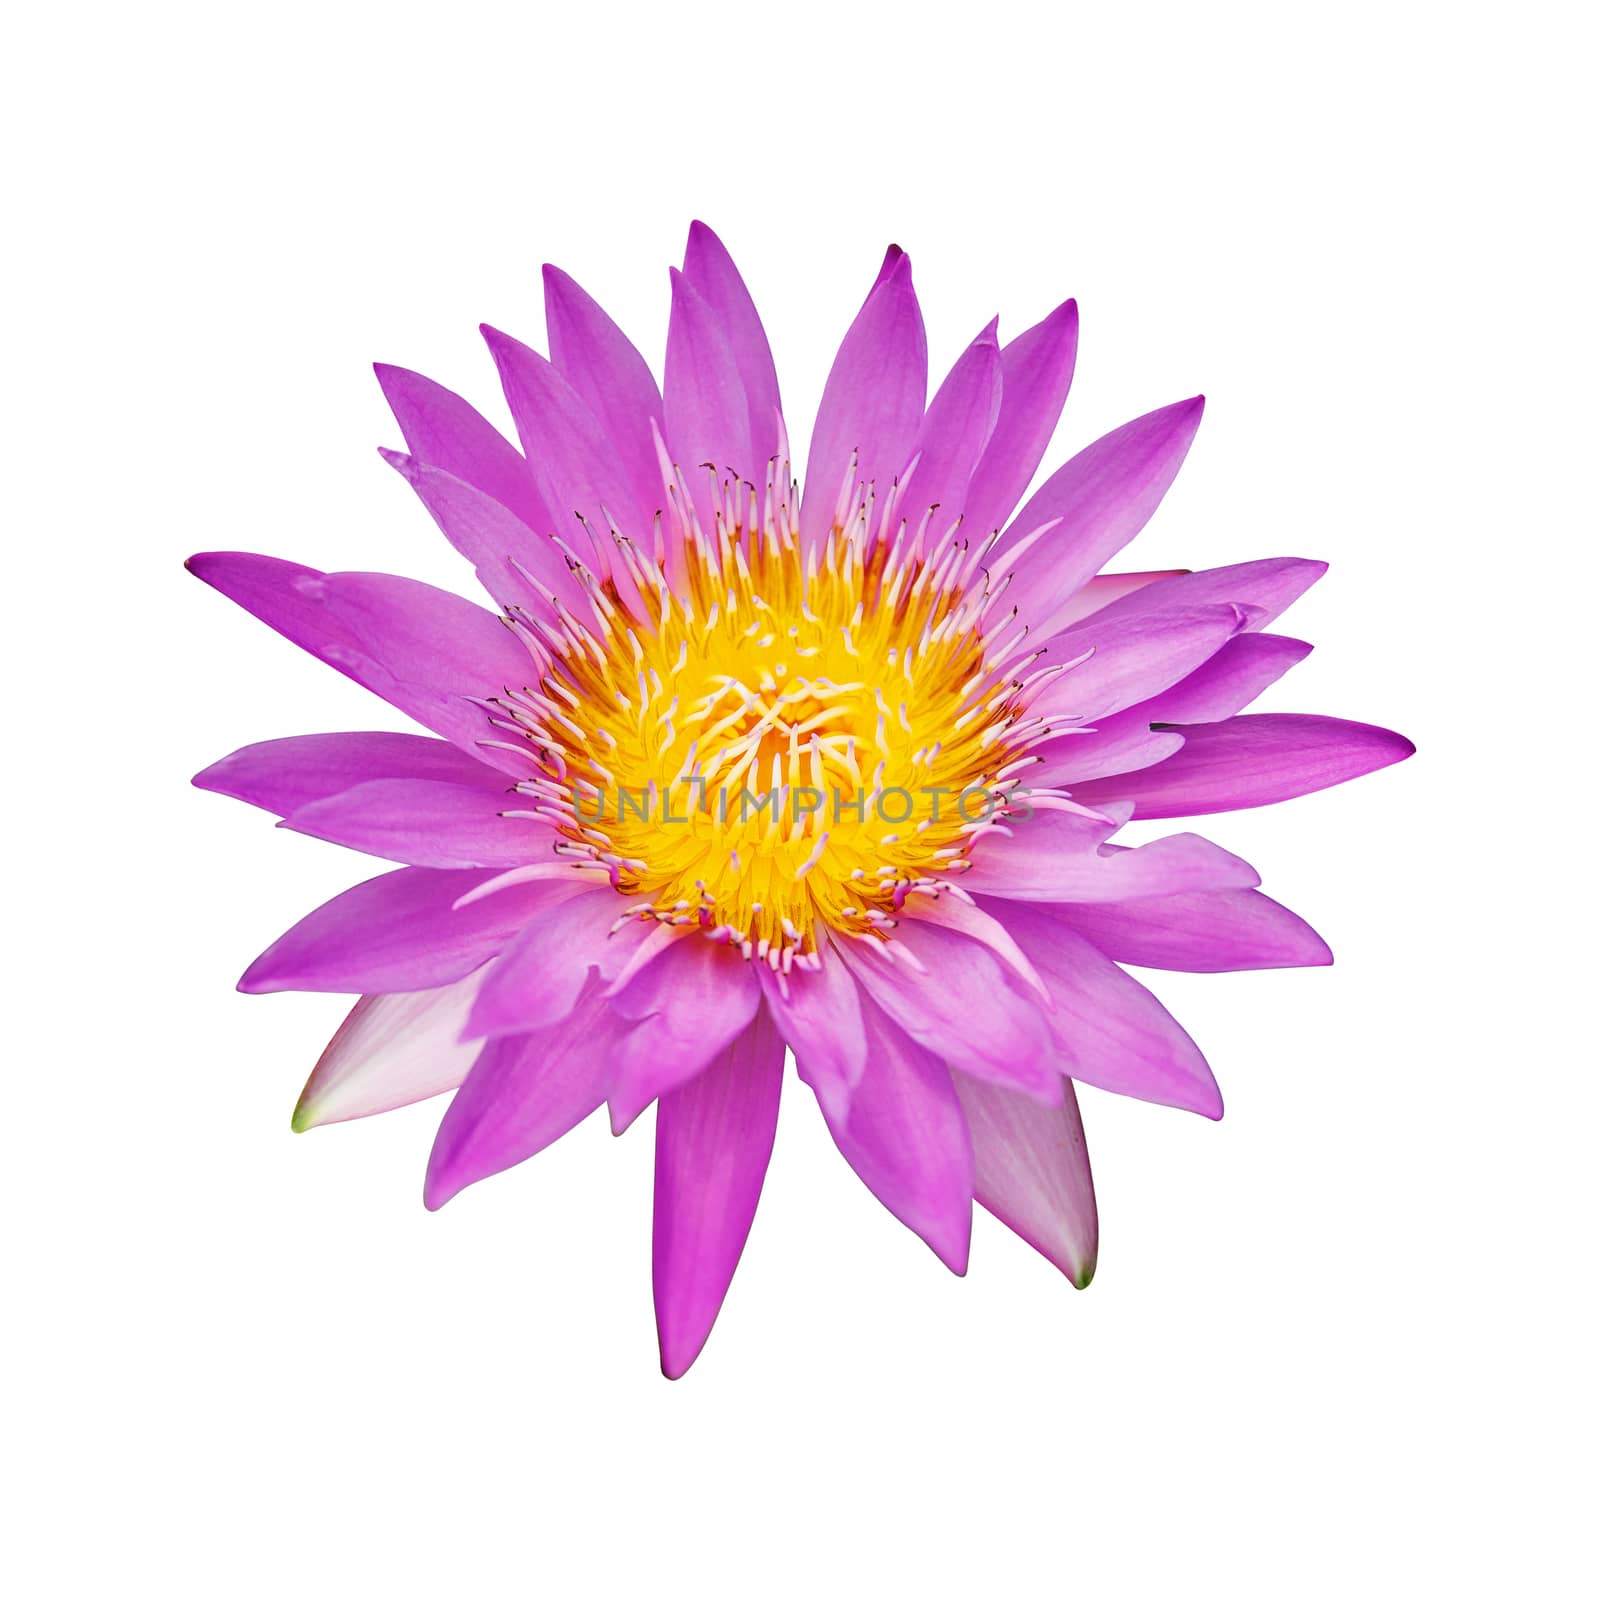 Pink lotus flowers that are blooming in full, showing beautiful stamens isolated on white background, with clipping path.